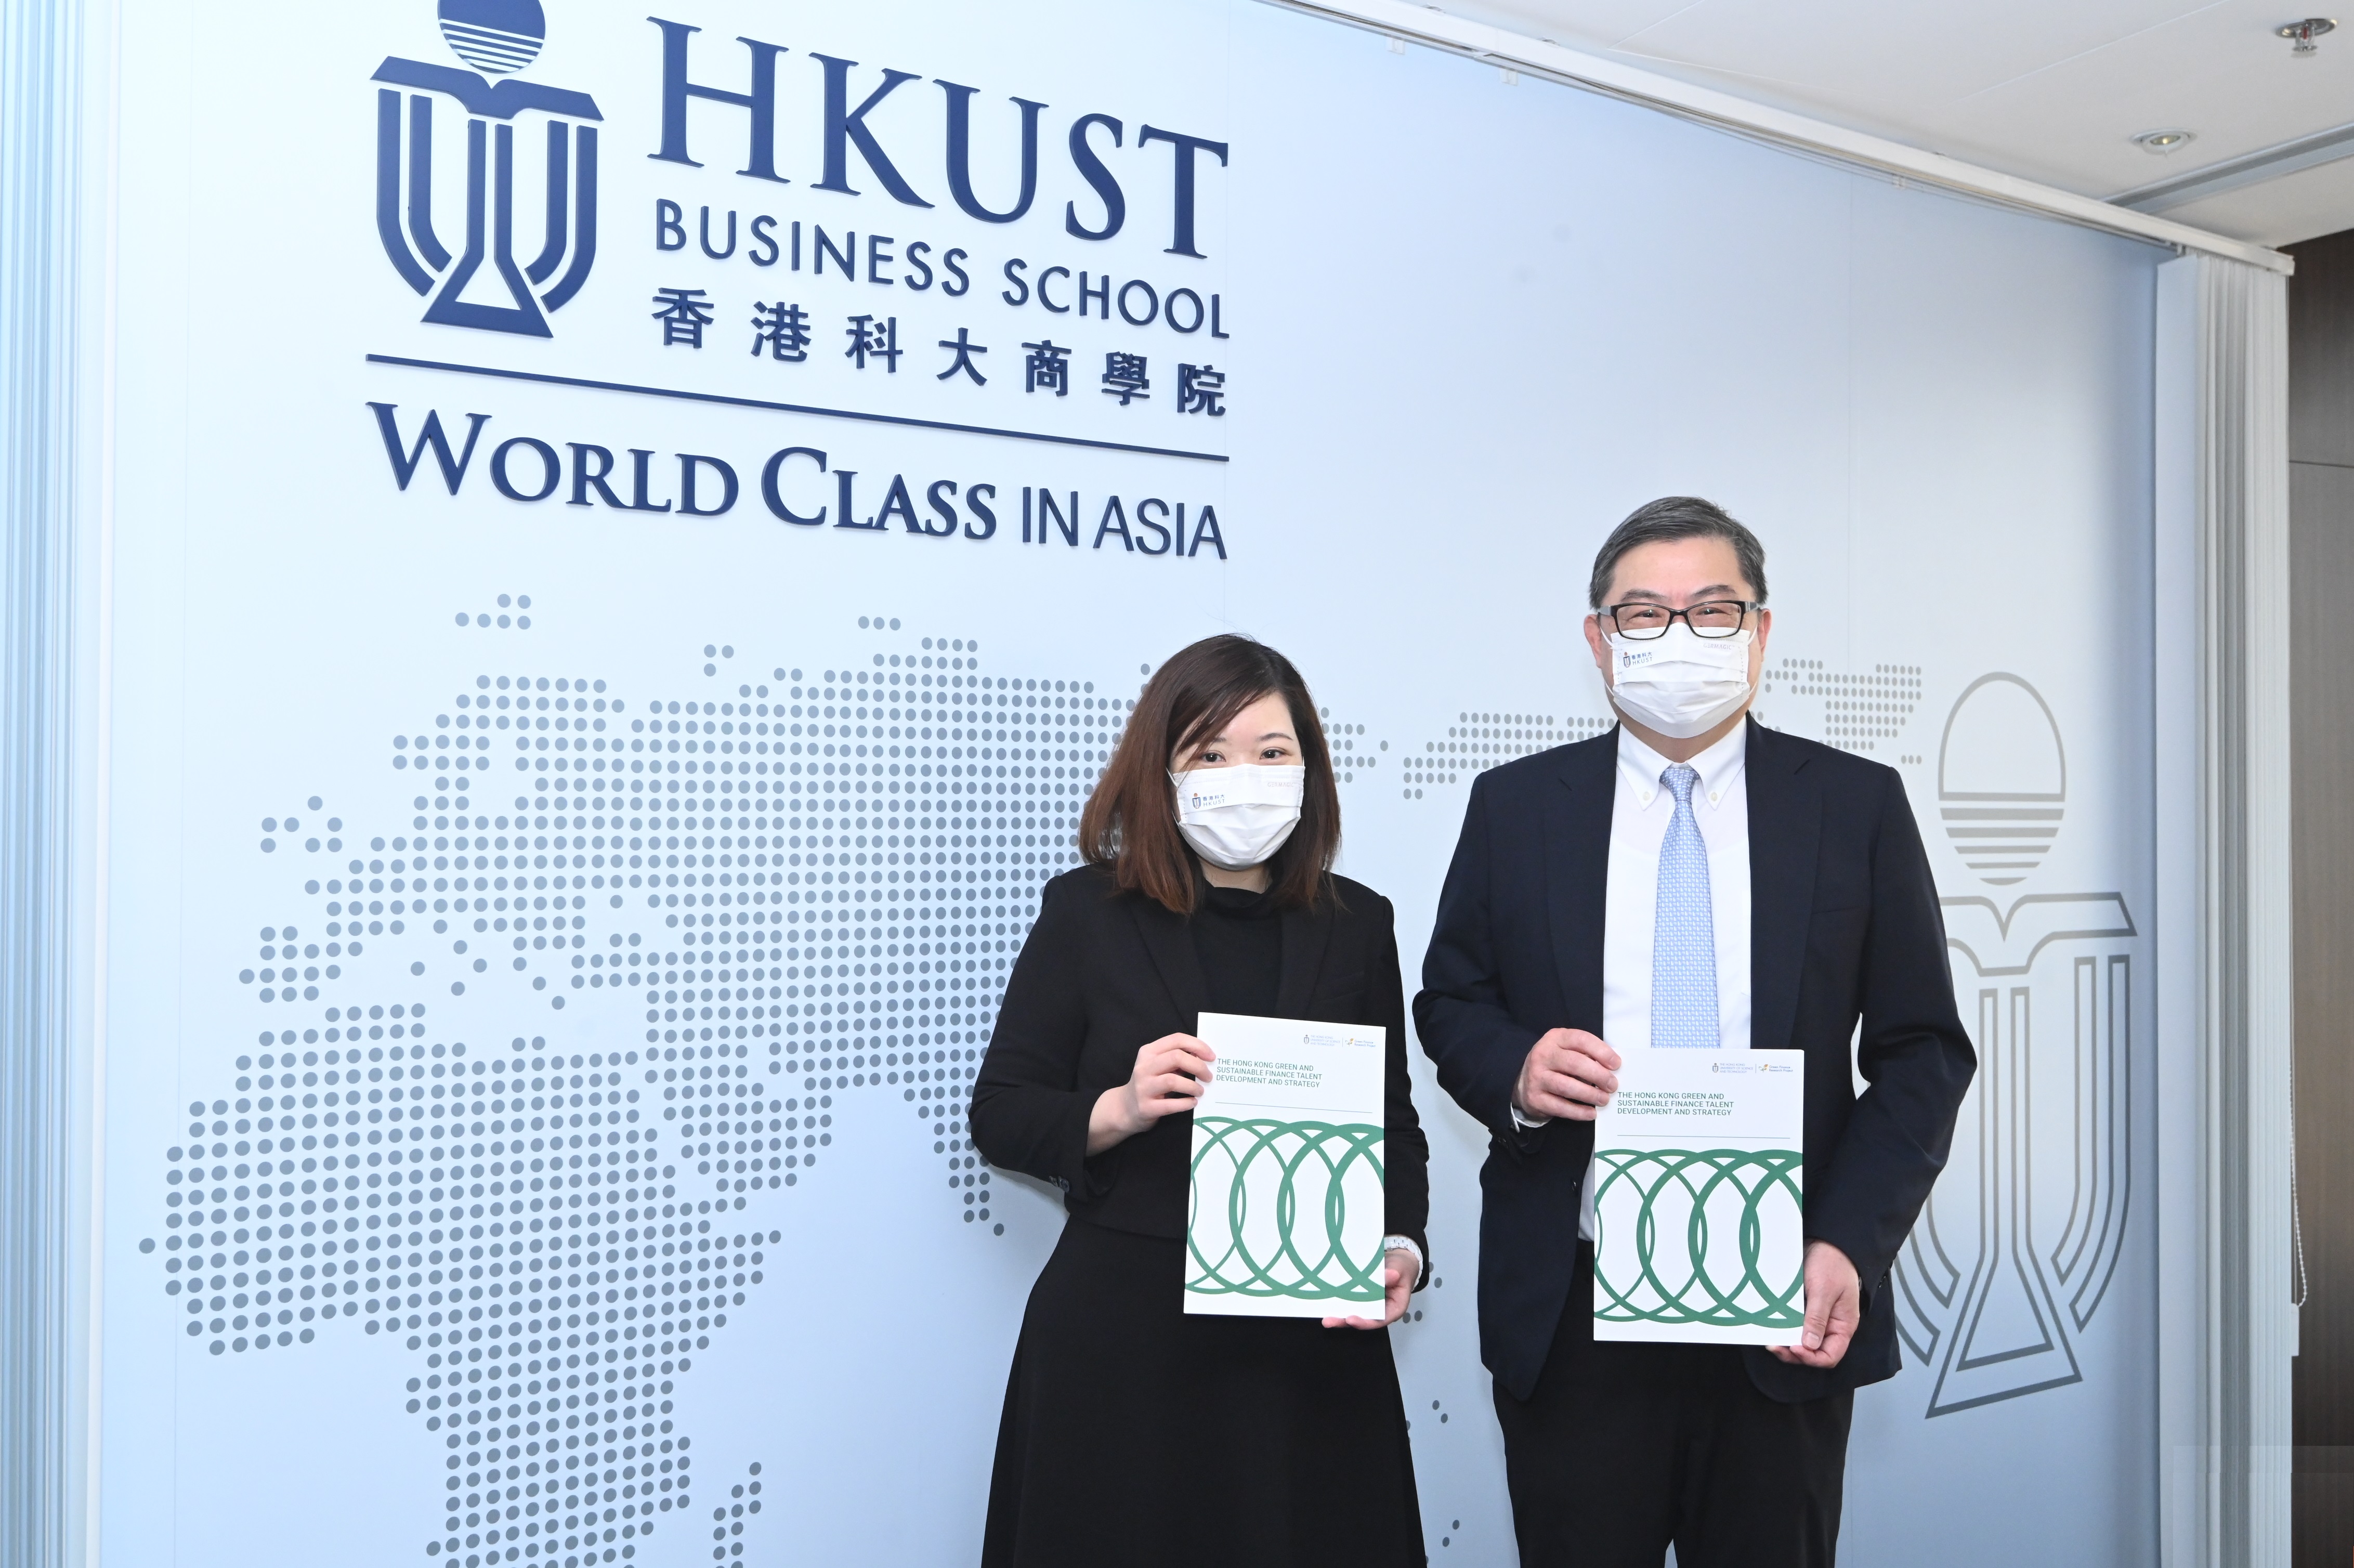 Dean Prof. Tam Kar-Yan and Head of Fintech and Green Finance Projects Ms. Christy Yeung of the HKUST Business School